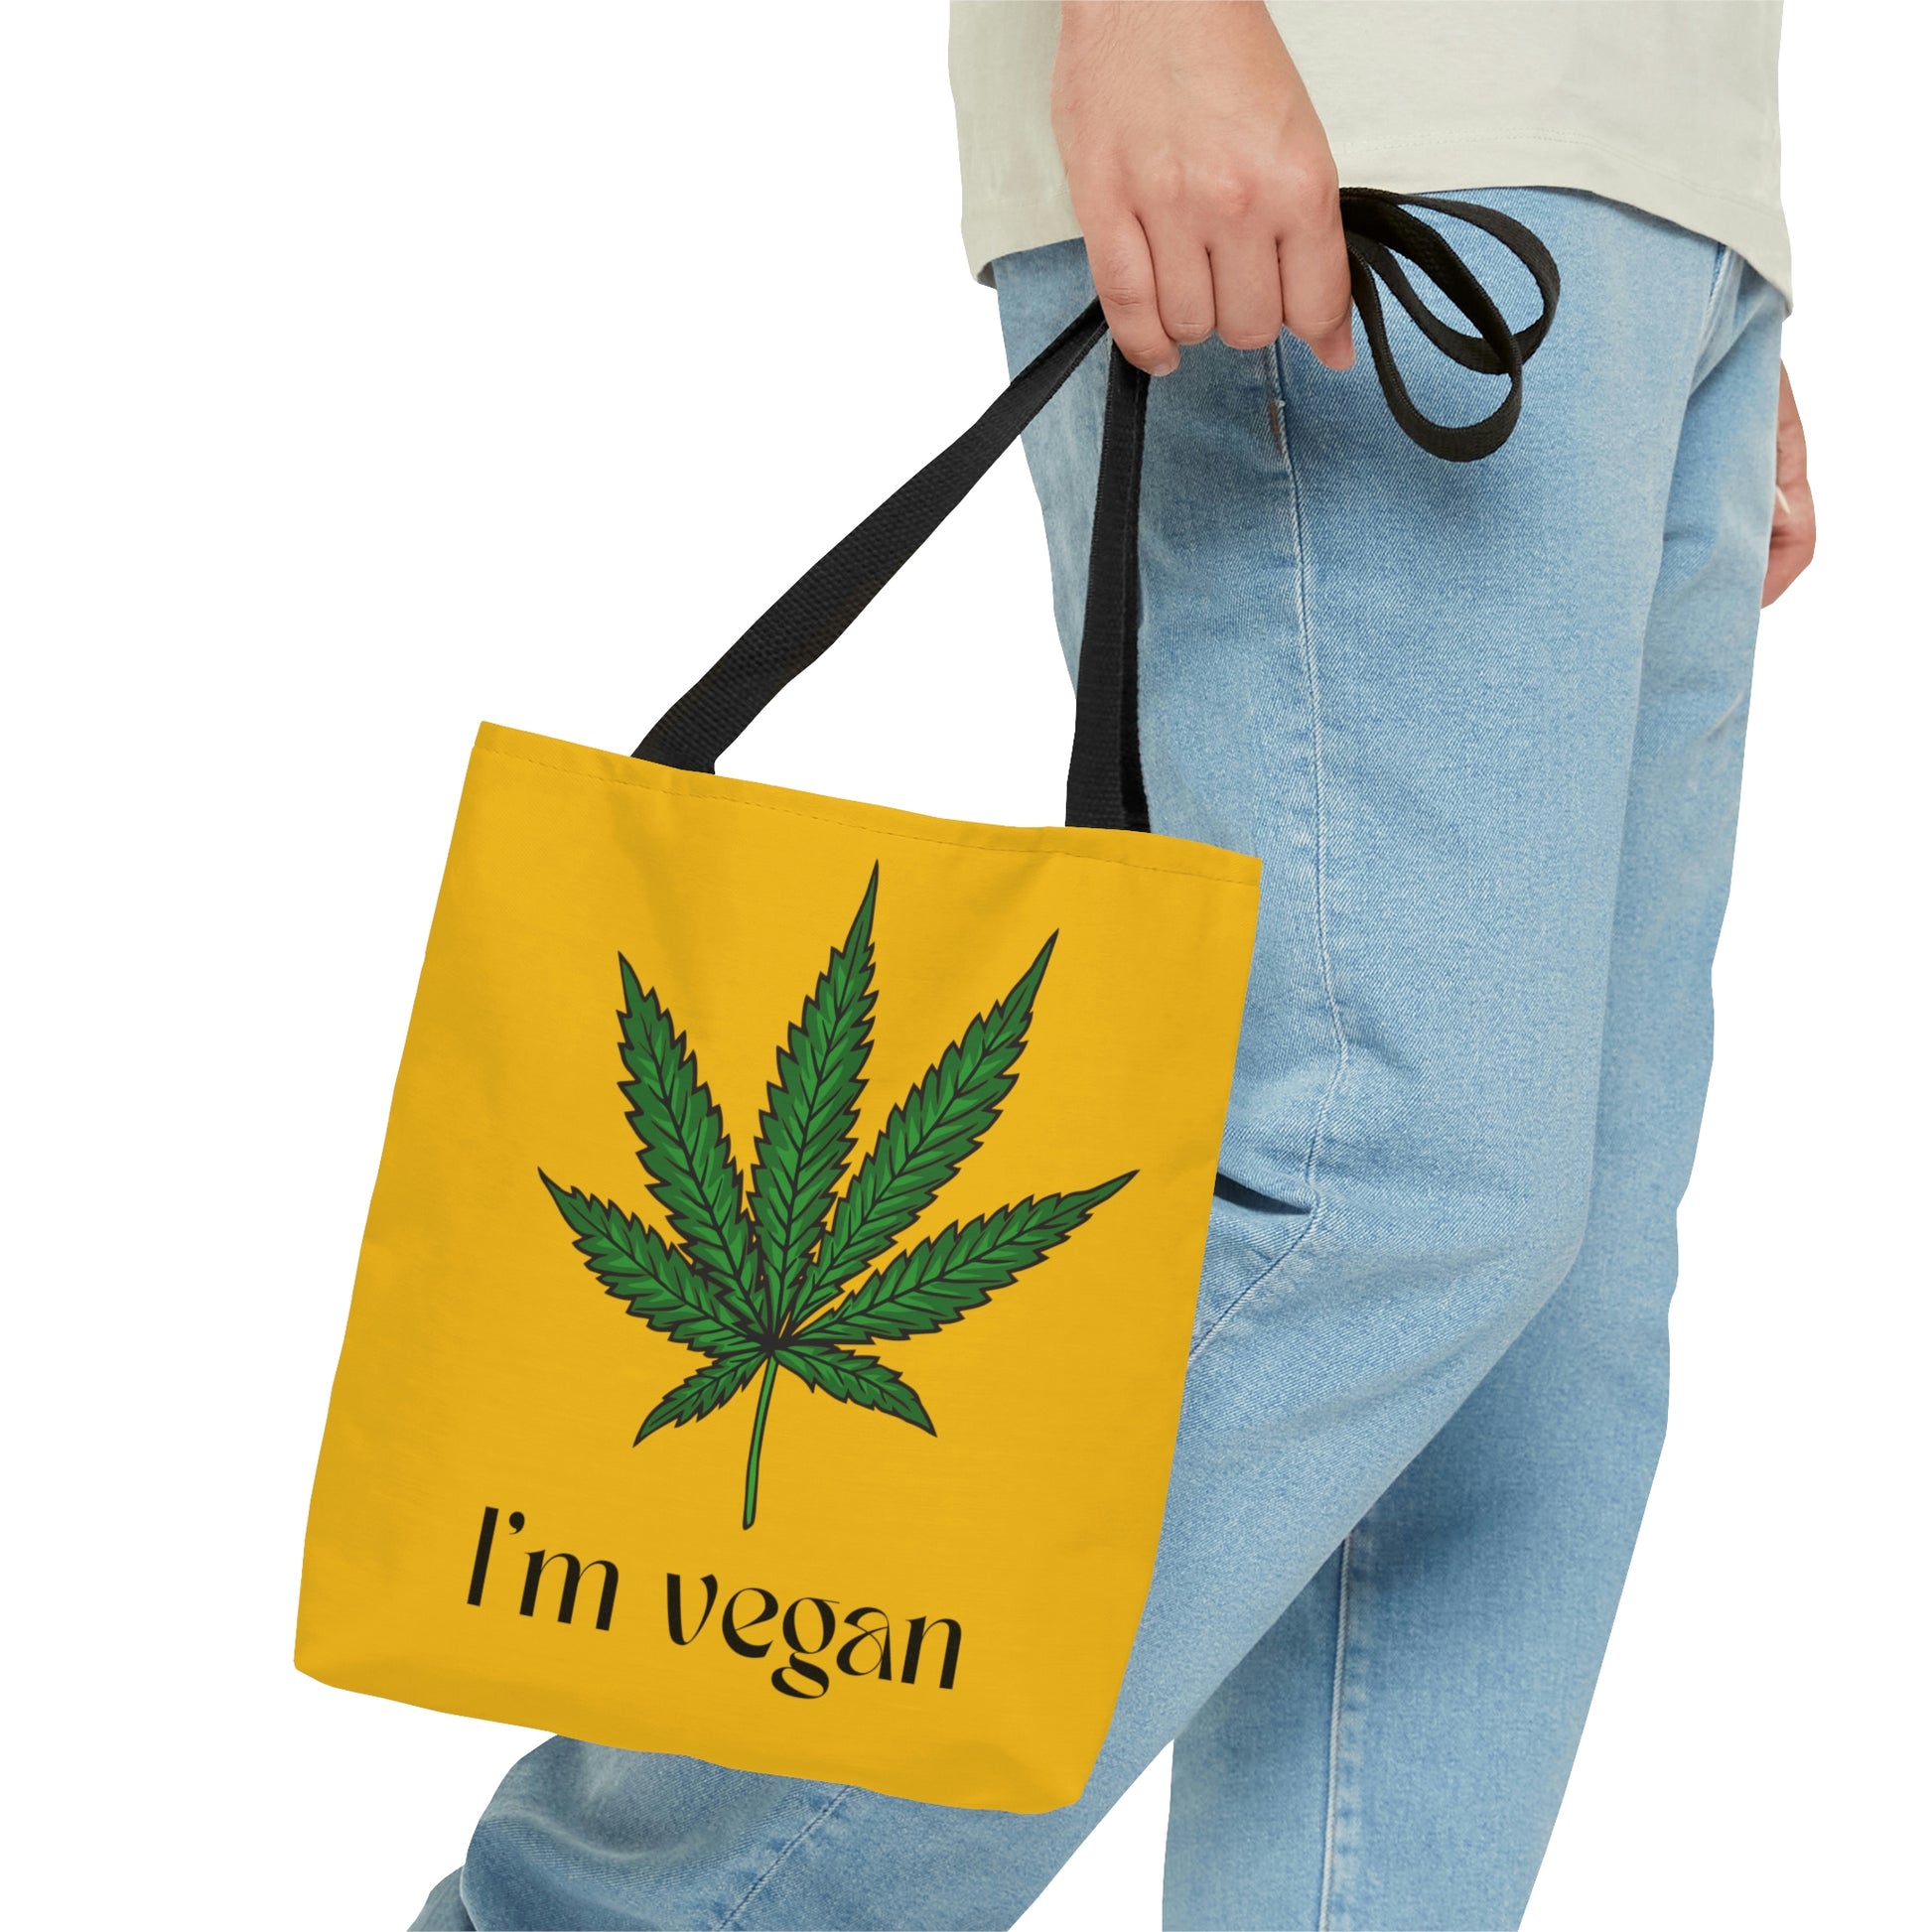 I'm Vegan Yellow Ganja Tote Bag with huge green weed leaf on front center being carried double strapped by a man in blue jeans